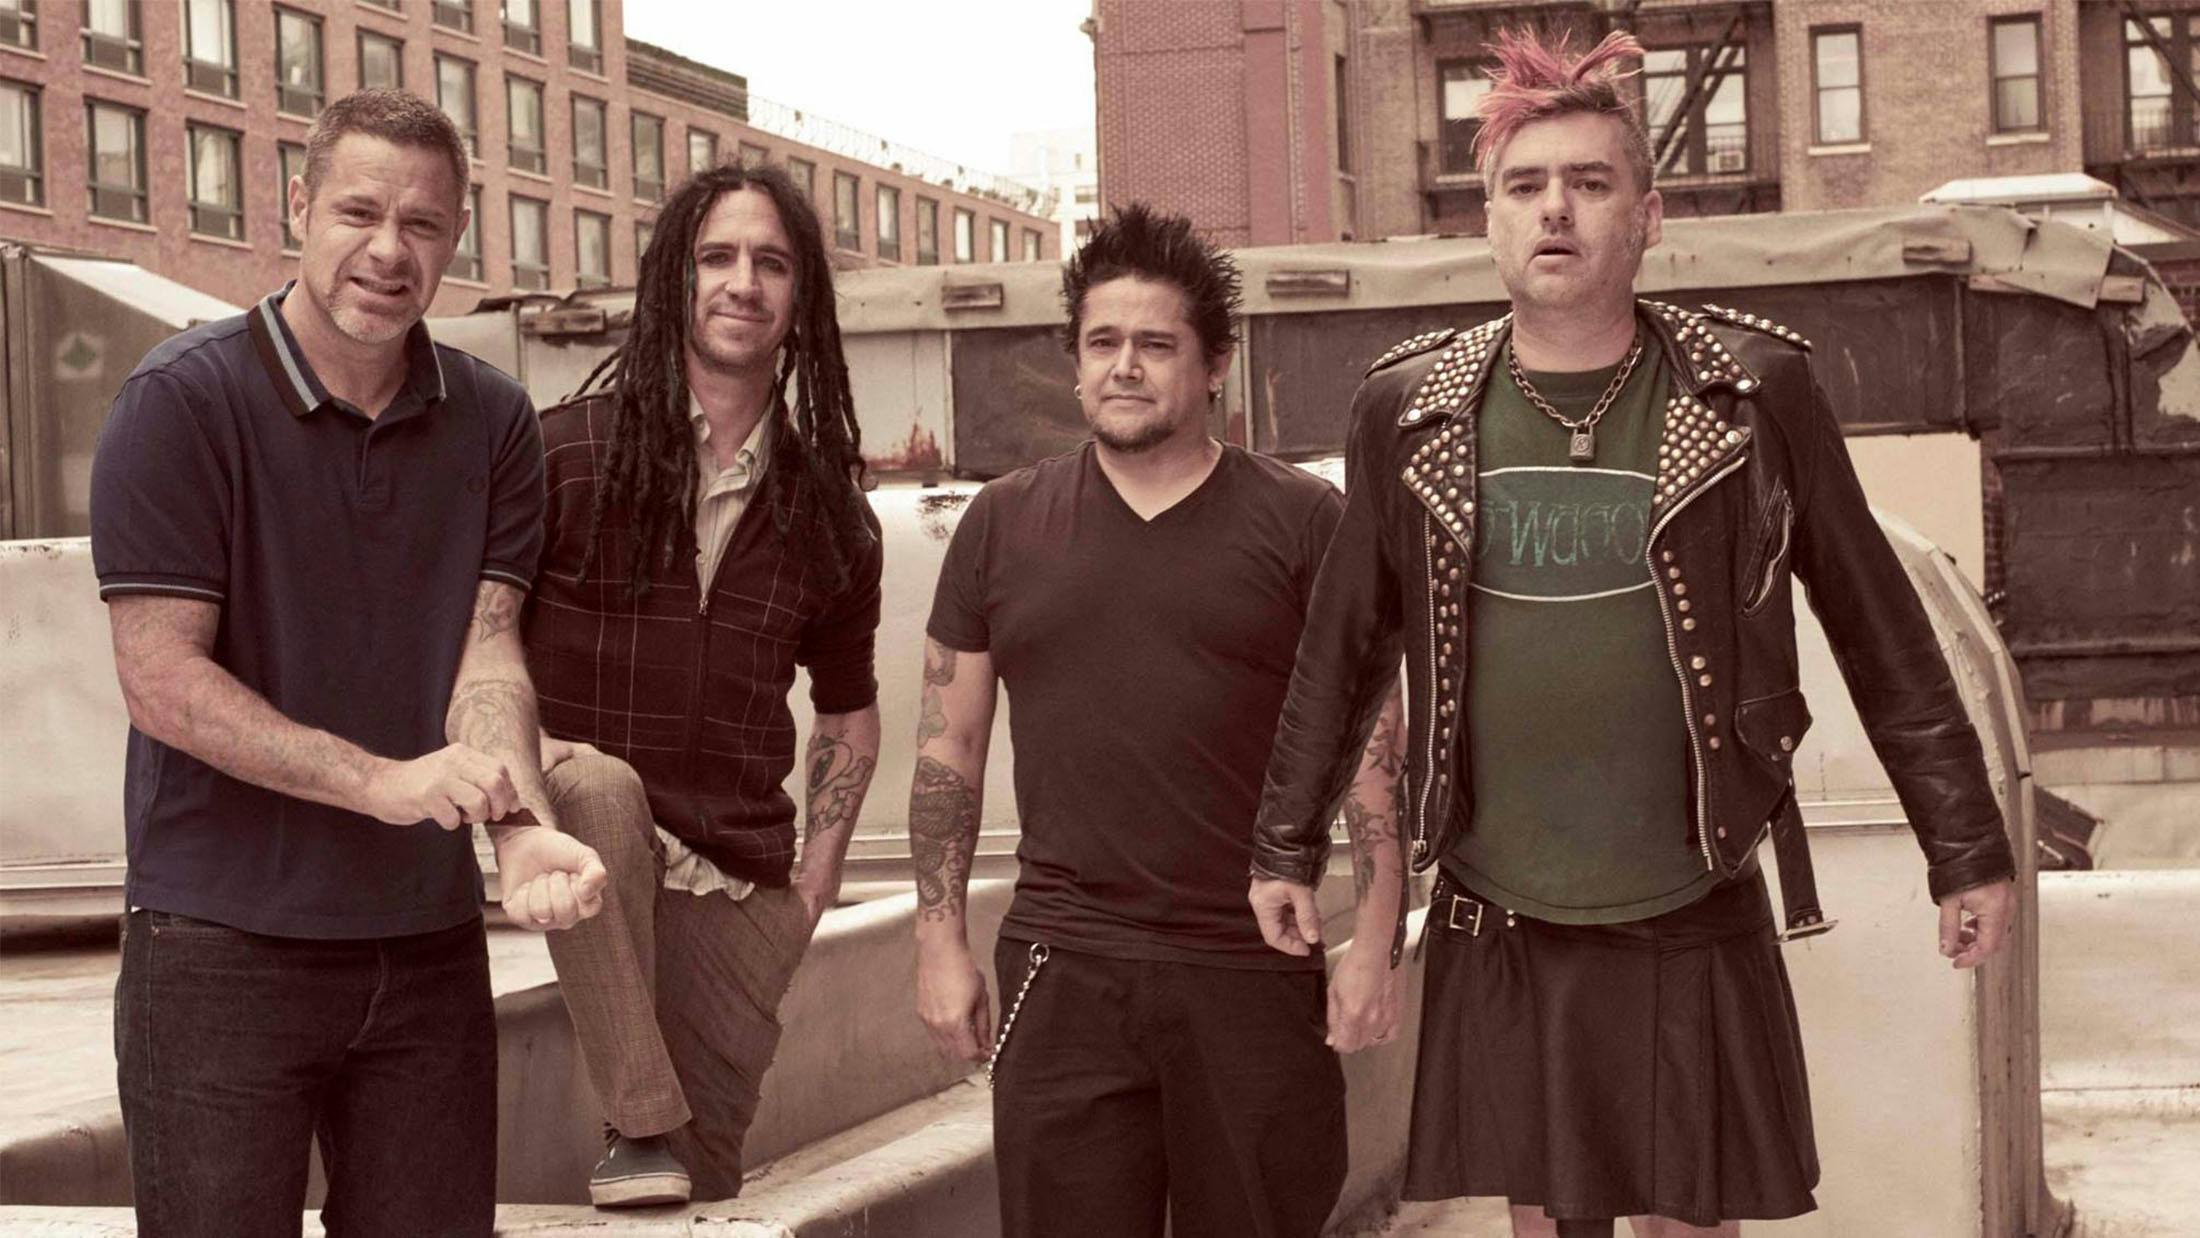 NOFX Release Apology For Joking Onstage About Las Vegas Concert Shooting Victims